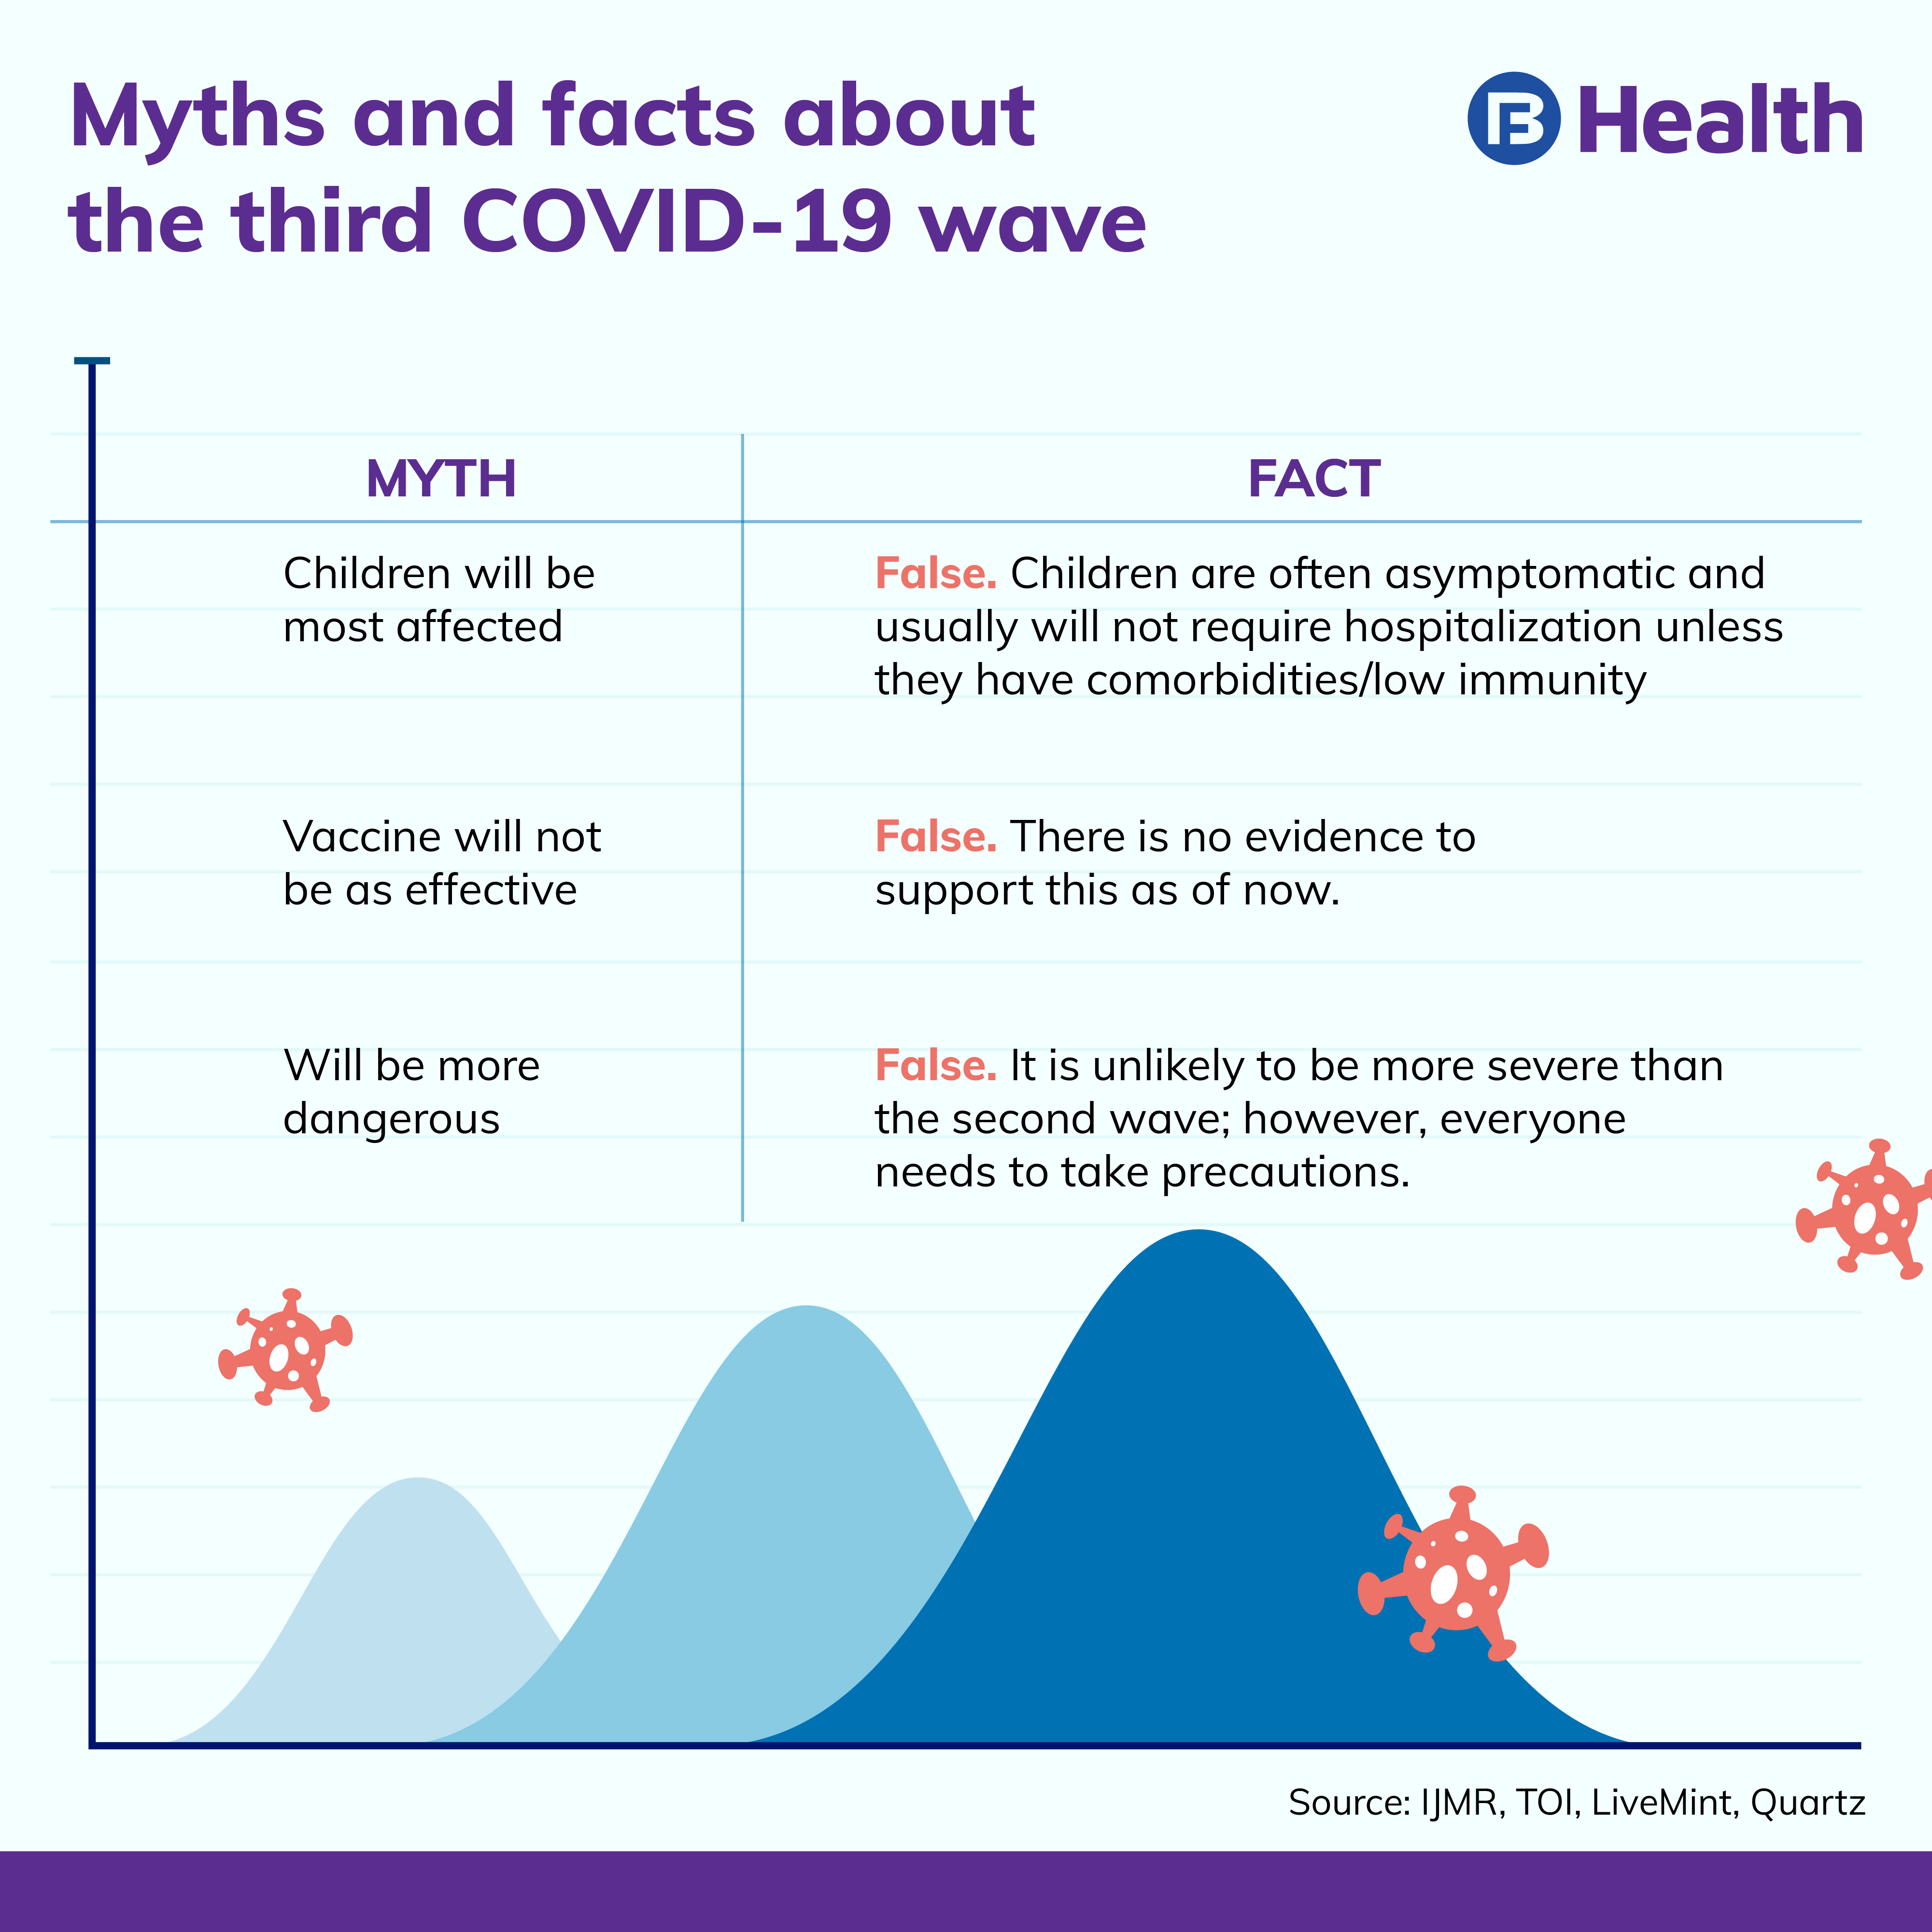 Myth and facts about 3rd COVID-19 wave